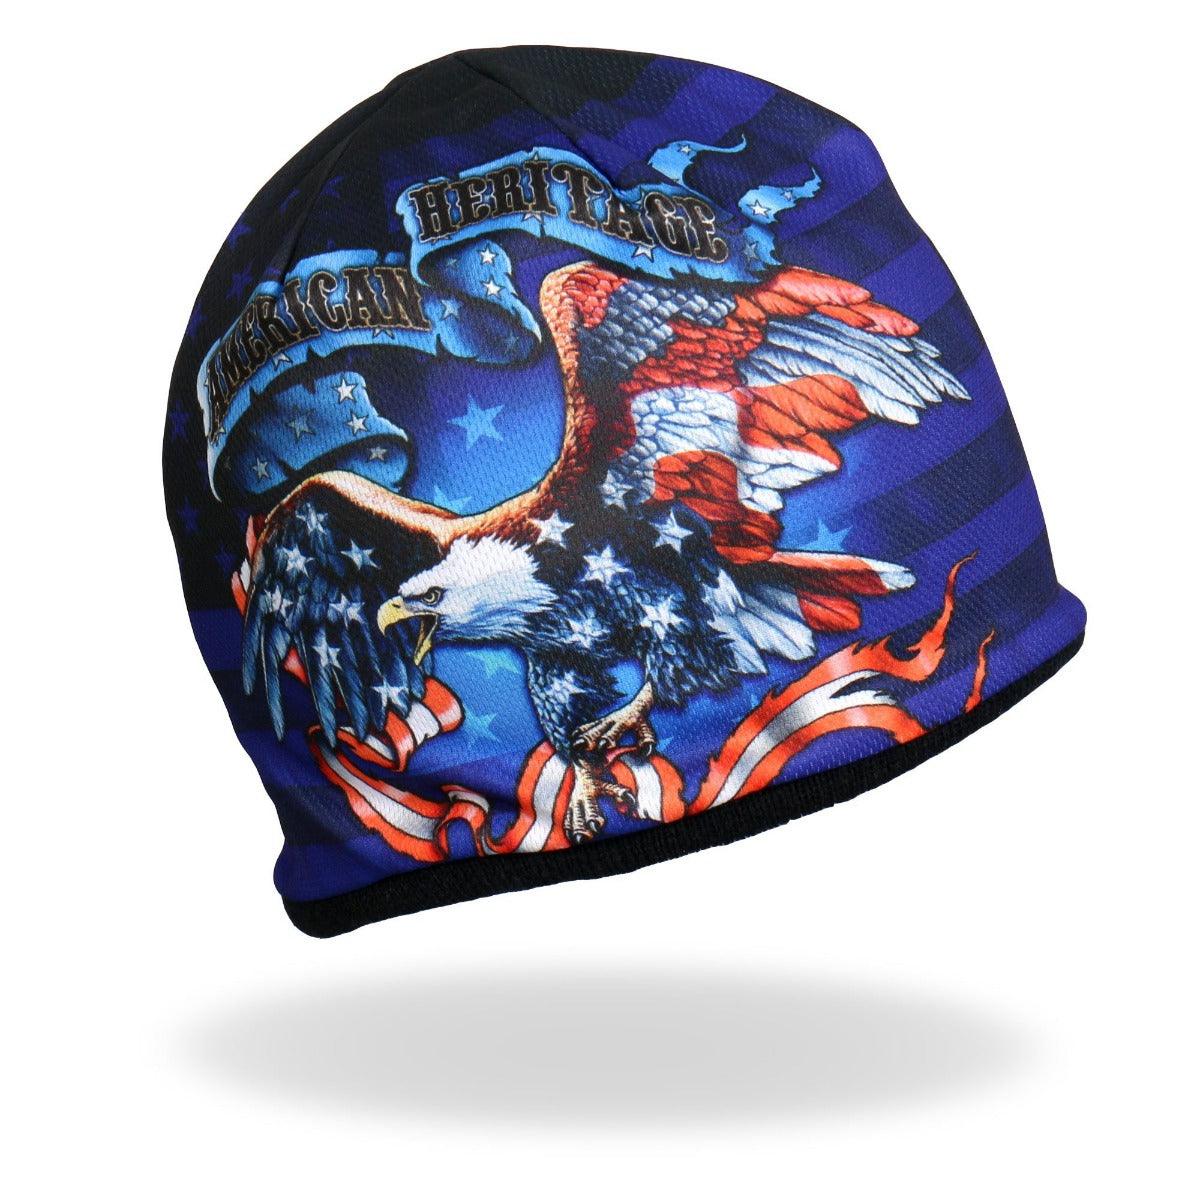 Hot Leathers Sublimated American Heritage Beanie - American Legend Rider